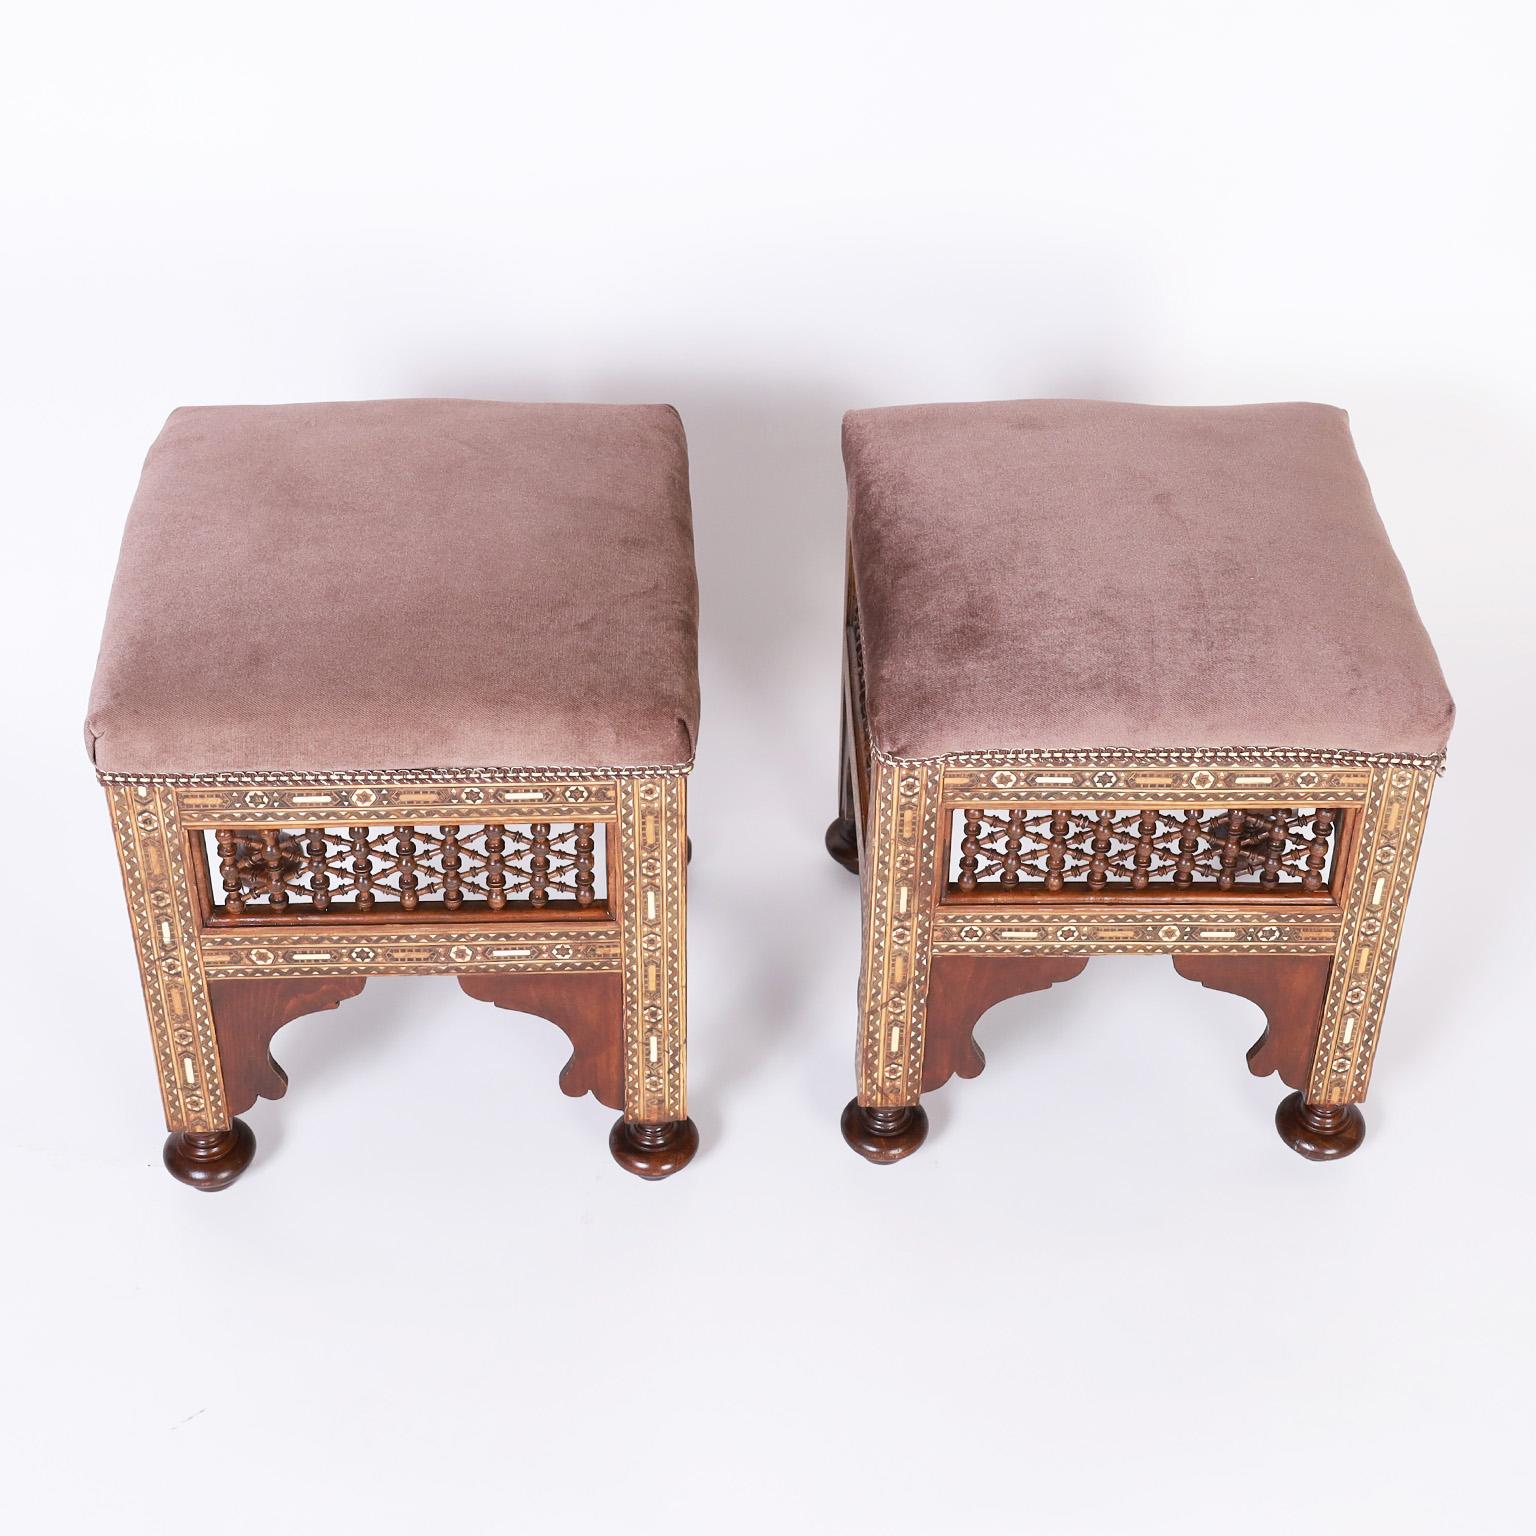 Pair of exotic near Eastern benches or stools with upholstered cushions over bases crafted in walnut featuring stick and ball panels, geometric inlays of bone, satinwood, and mahogany and moorish arches on turned feet.